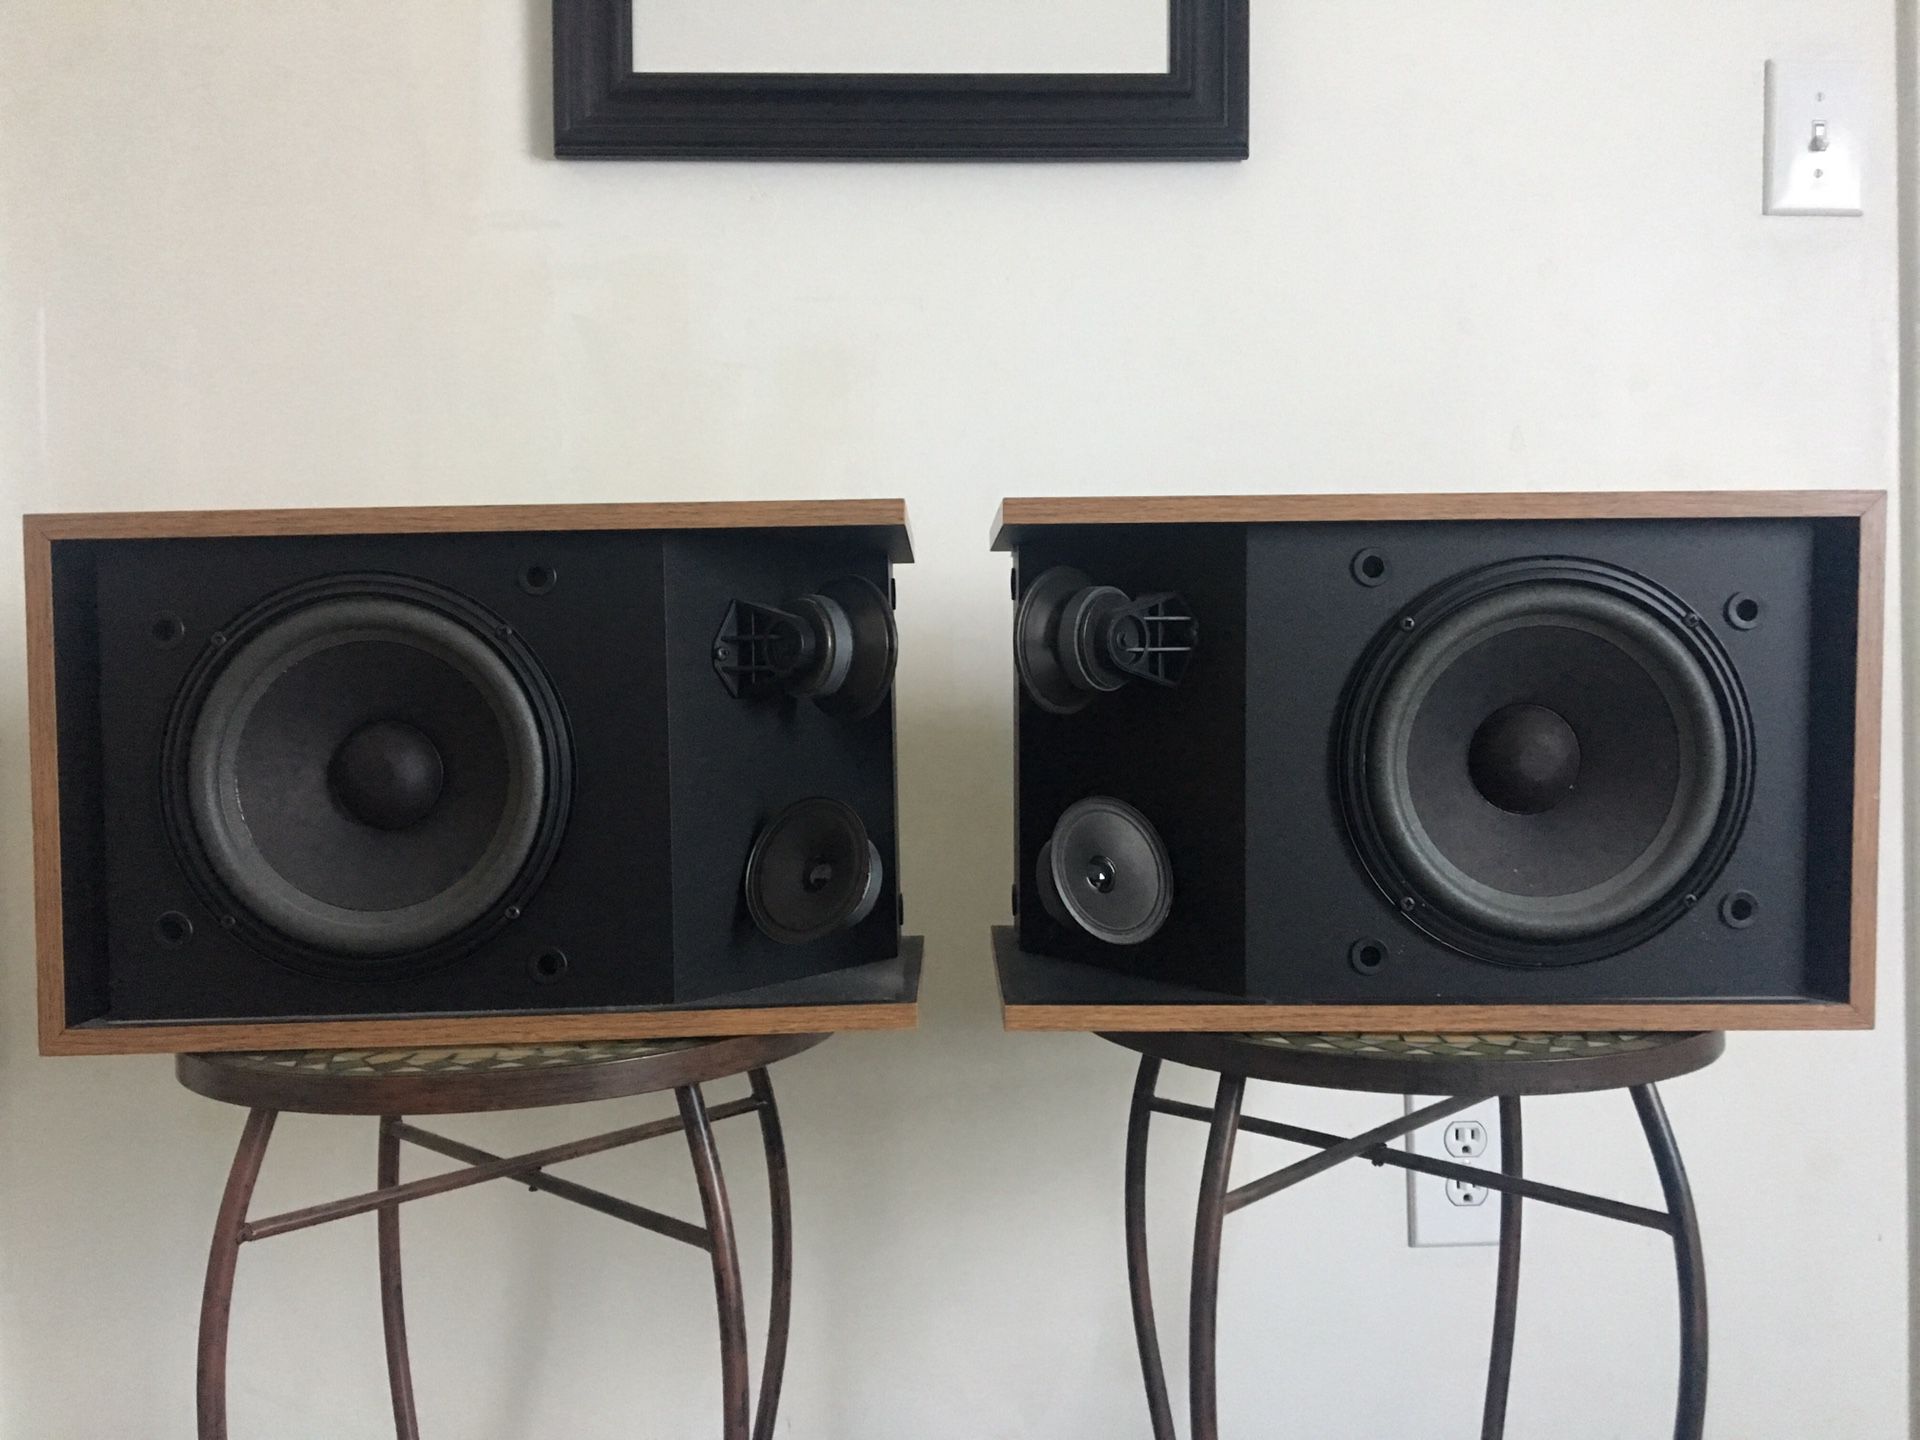 301 Series III Direct Reflecting Bookshelf Speakers - Walnut for Sale in Lake Park, NC - OfferUp